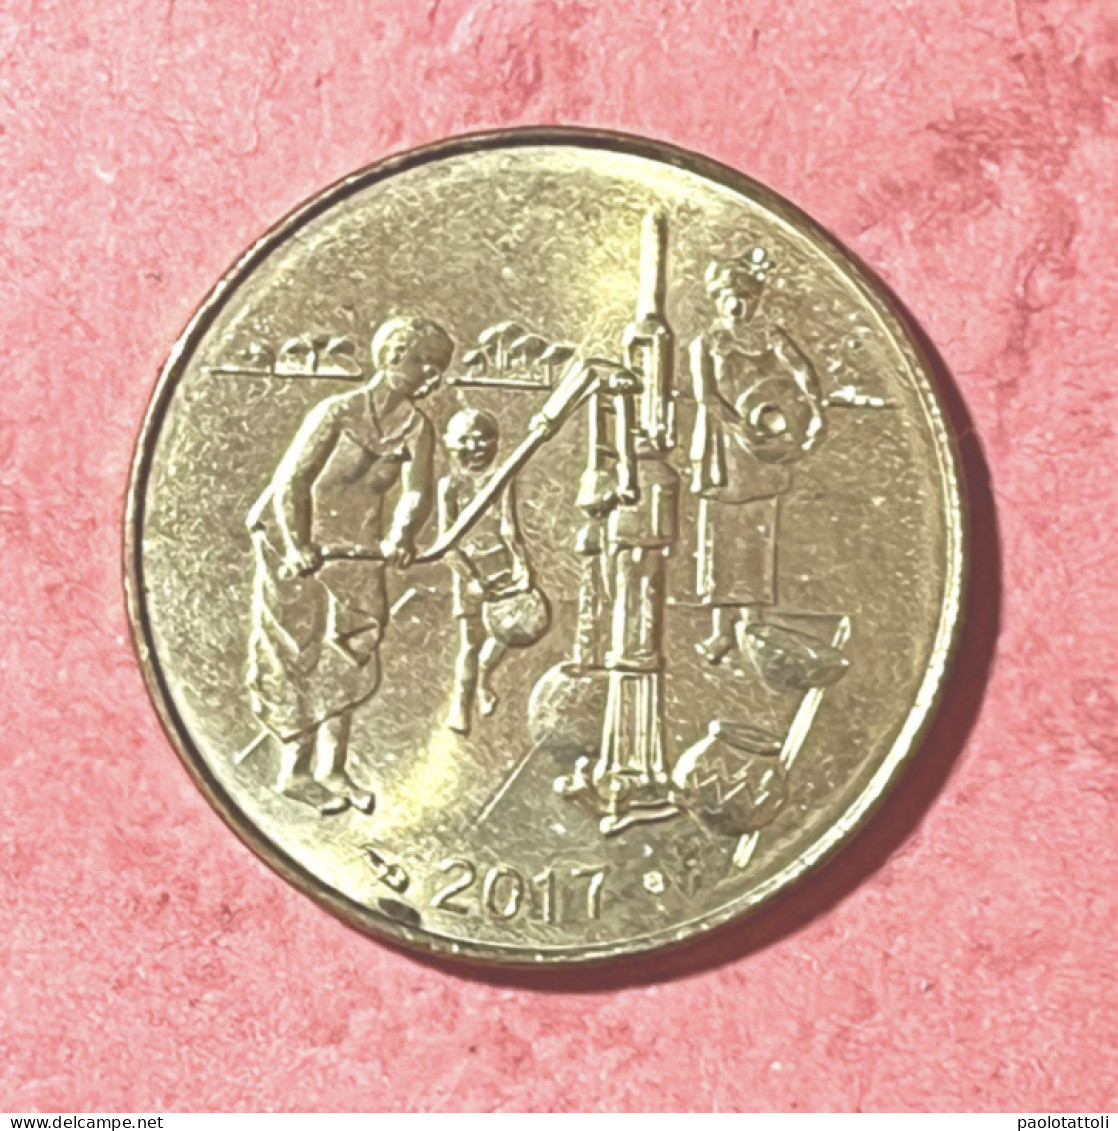 West African States, 2017- 10 Francs. Circulating Commemorative Coin-Aluminium Bronze- - Other - Africa